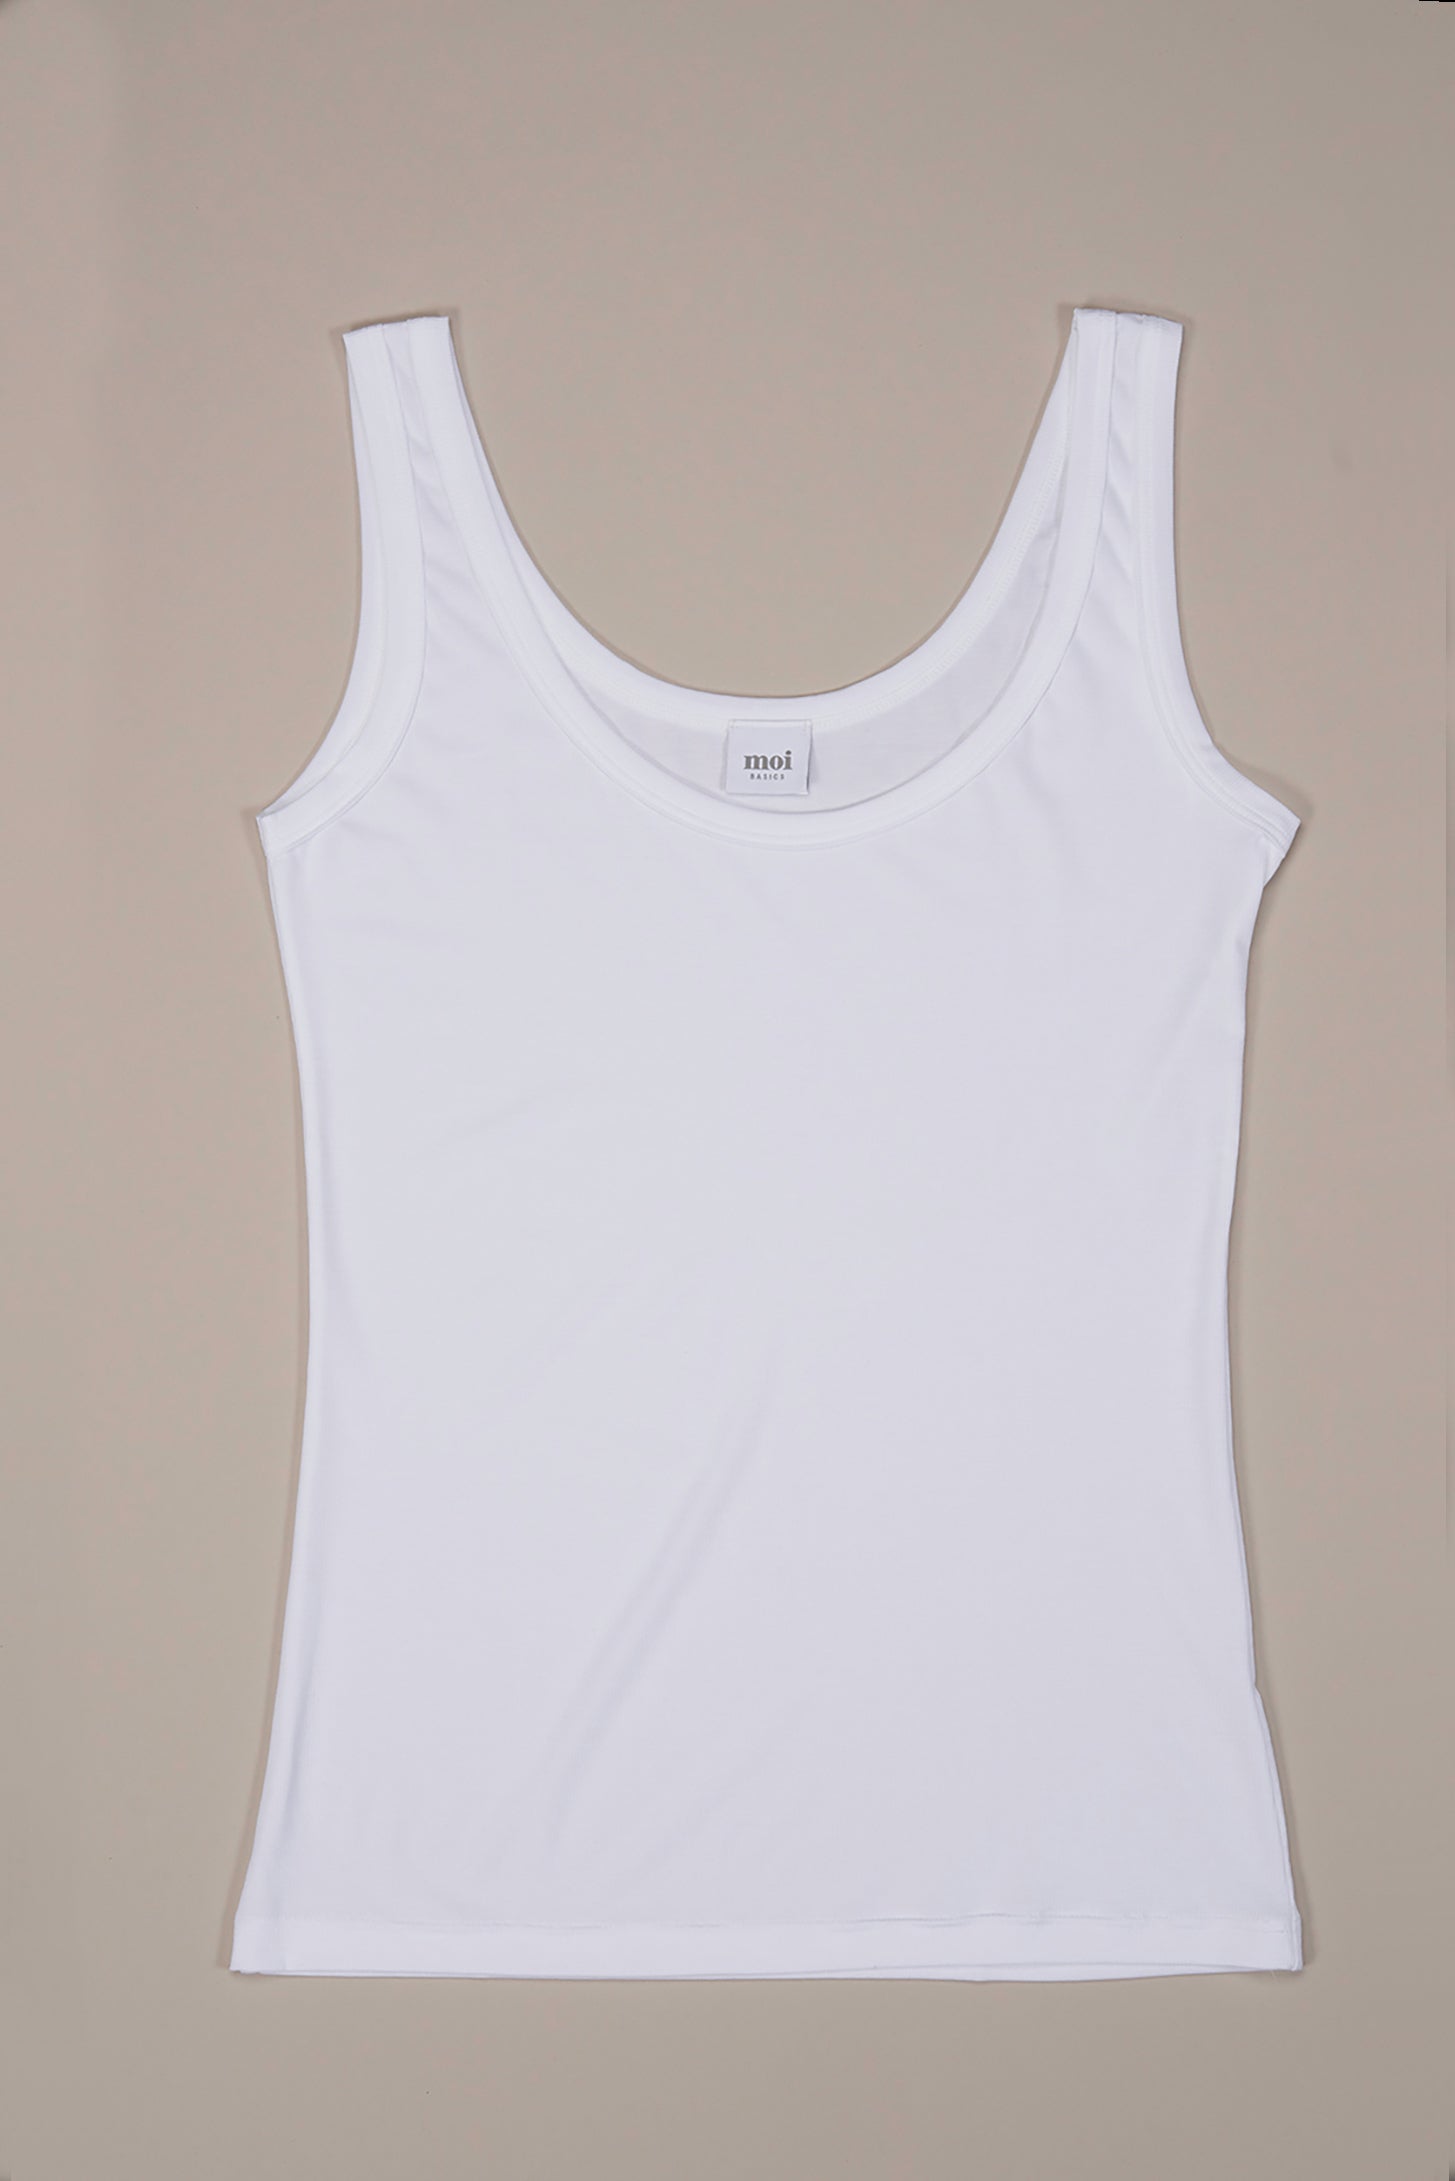 Tank top / undershirt in white made from natural MicroModal from moi-basics